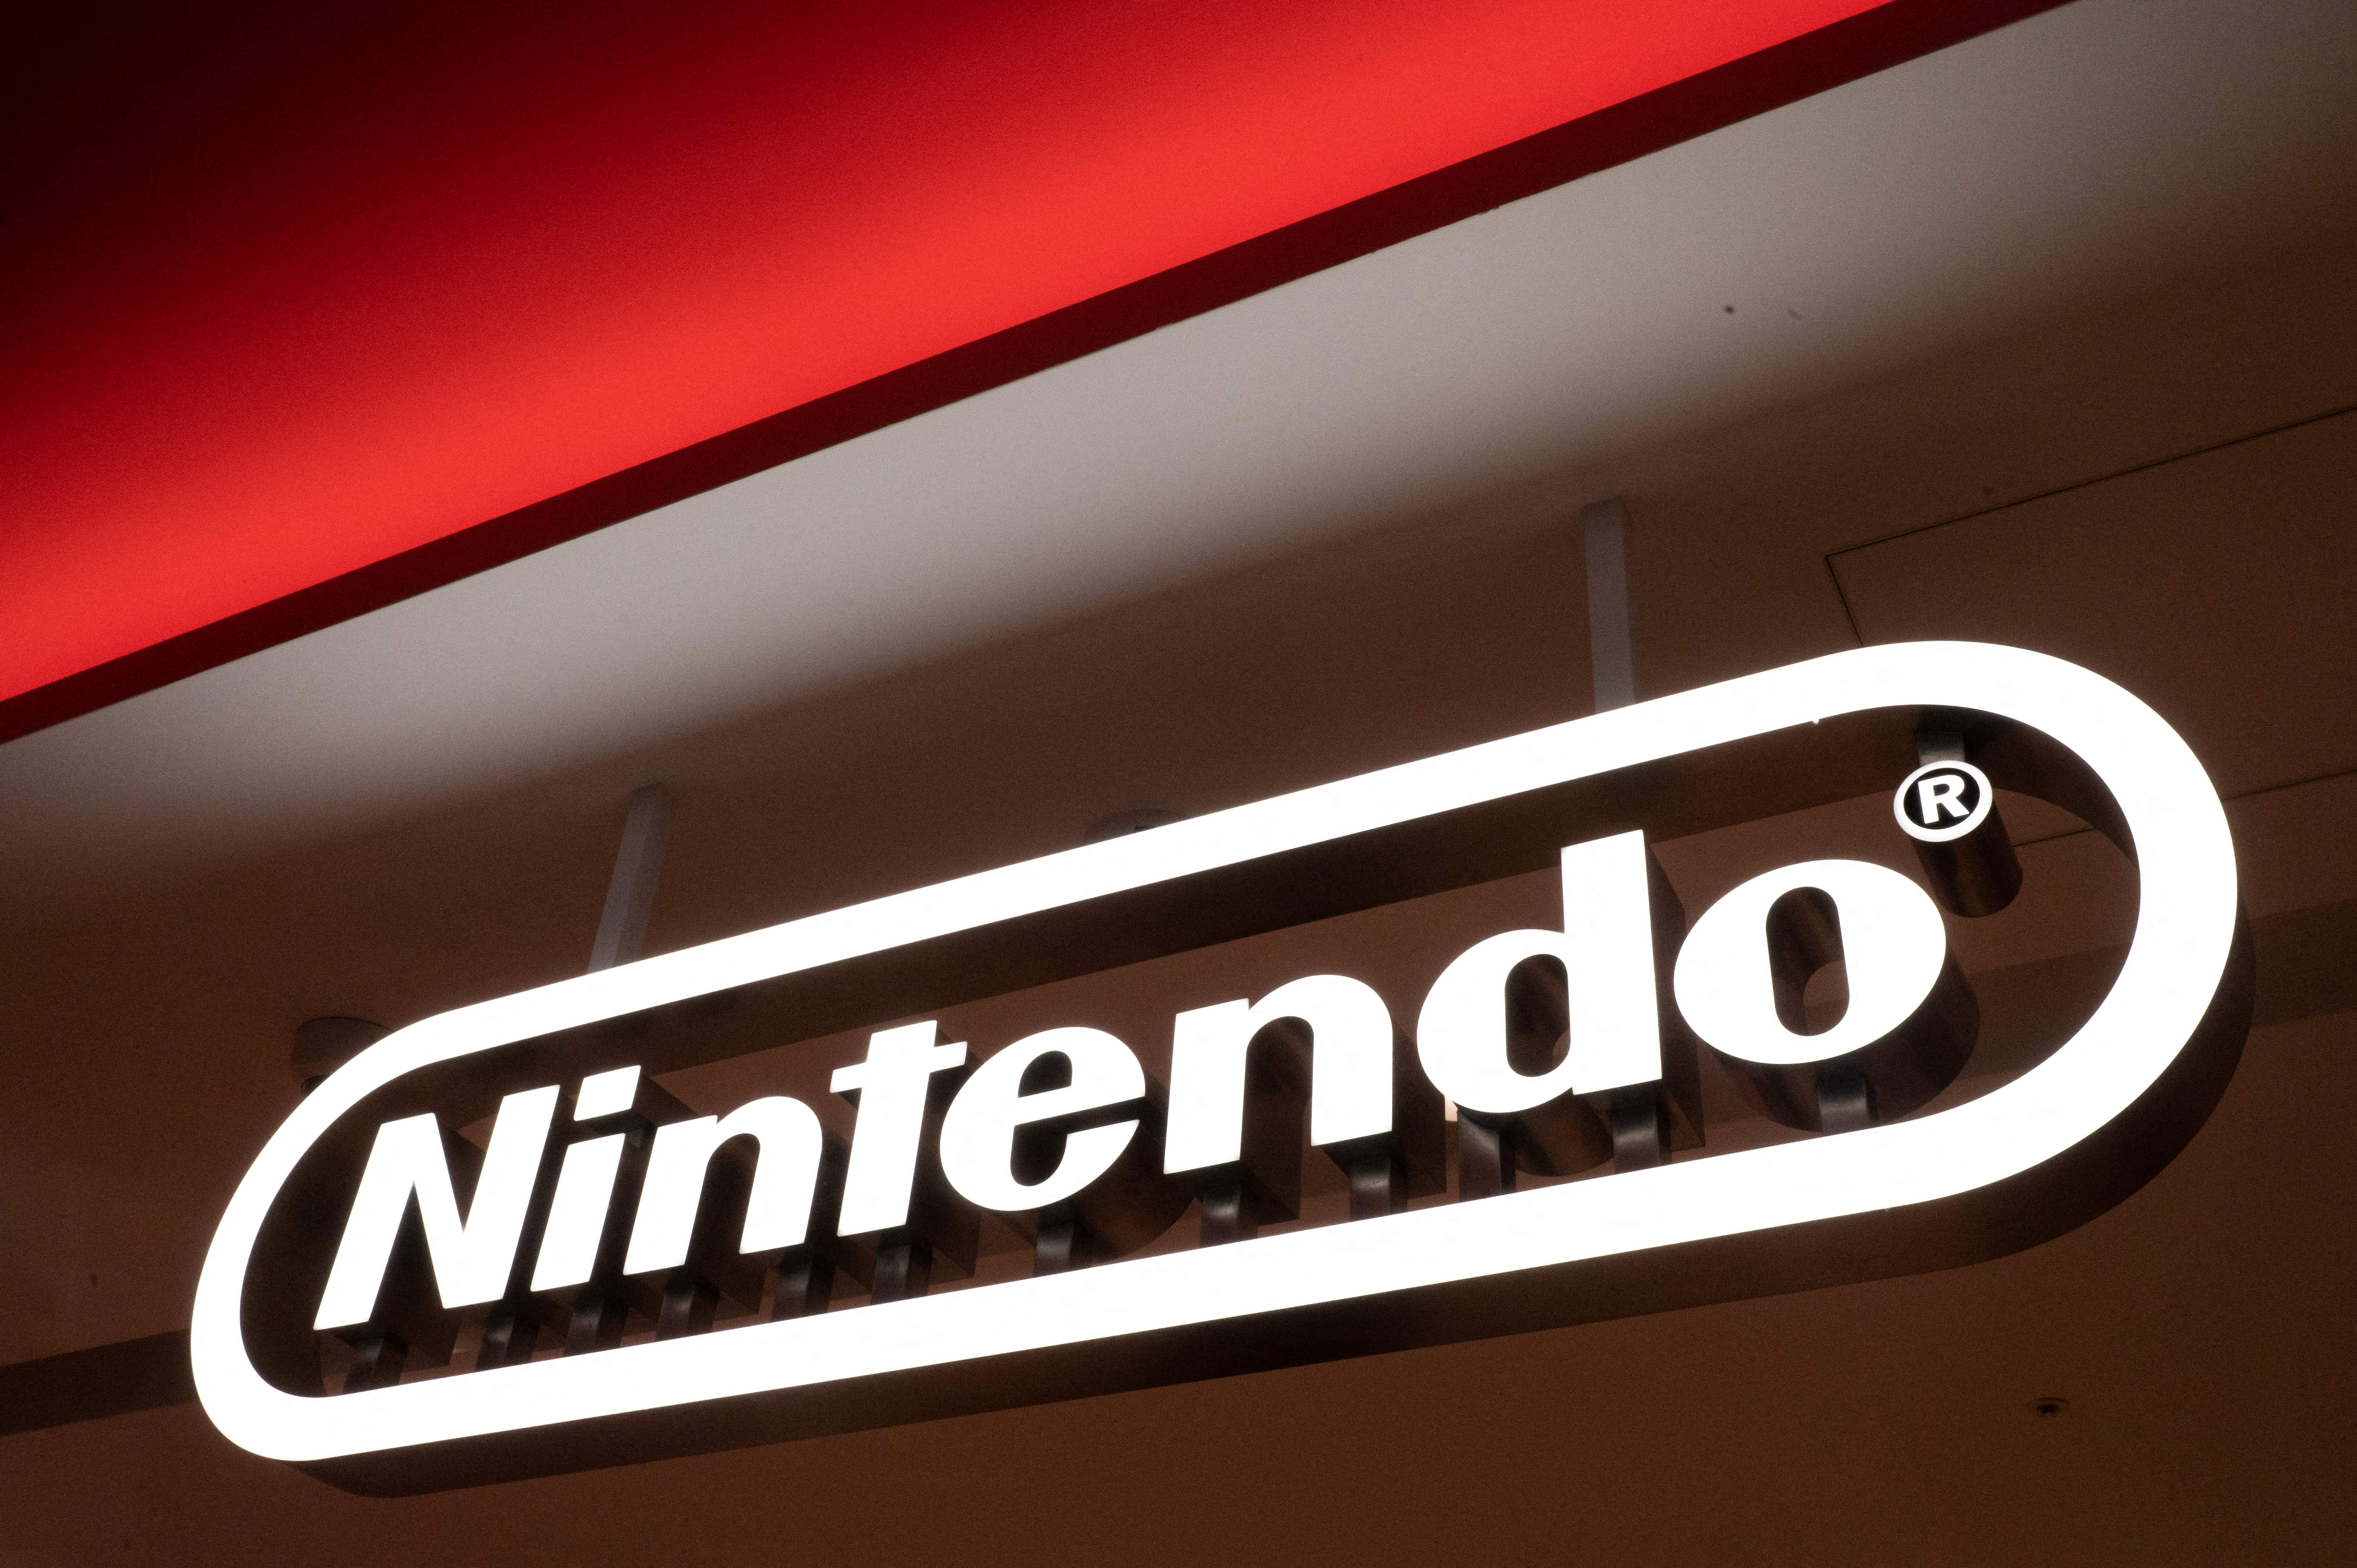 Nintendo logo is pictured in red and white